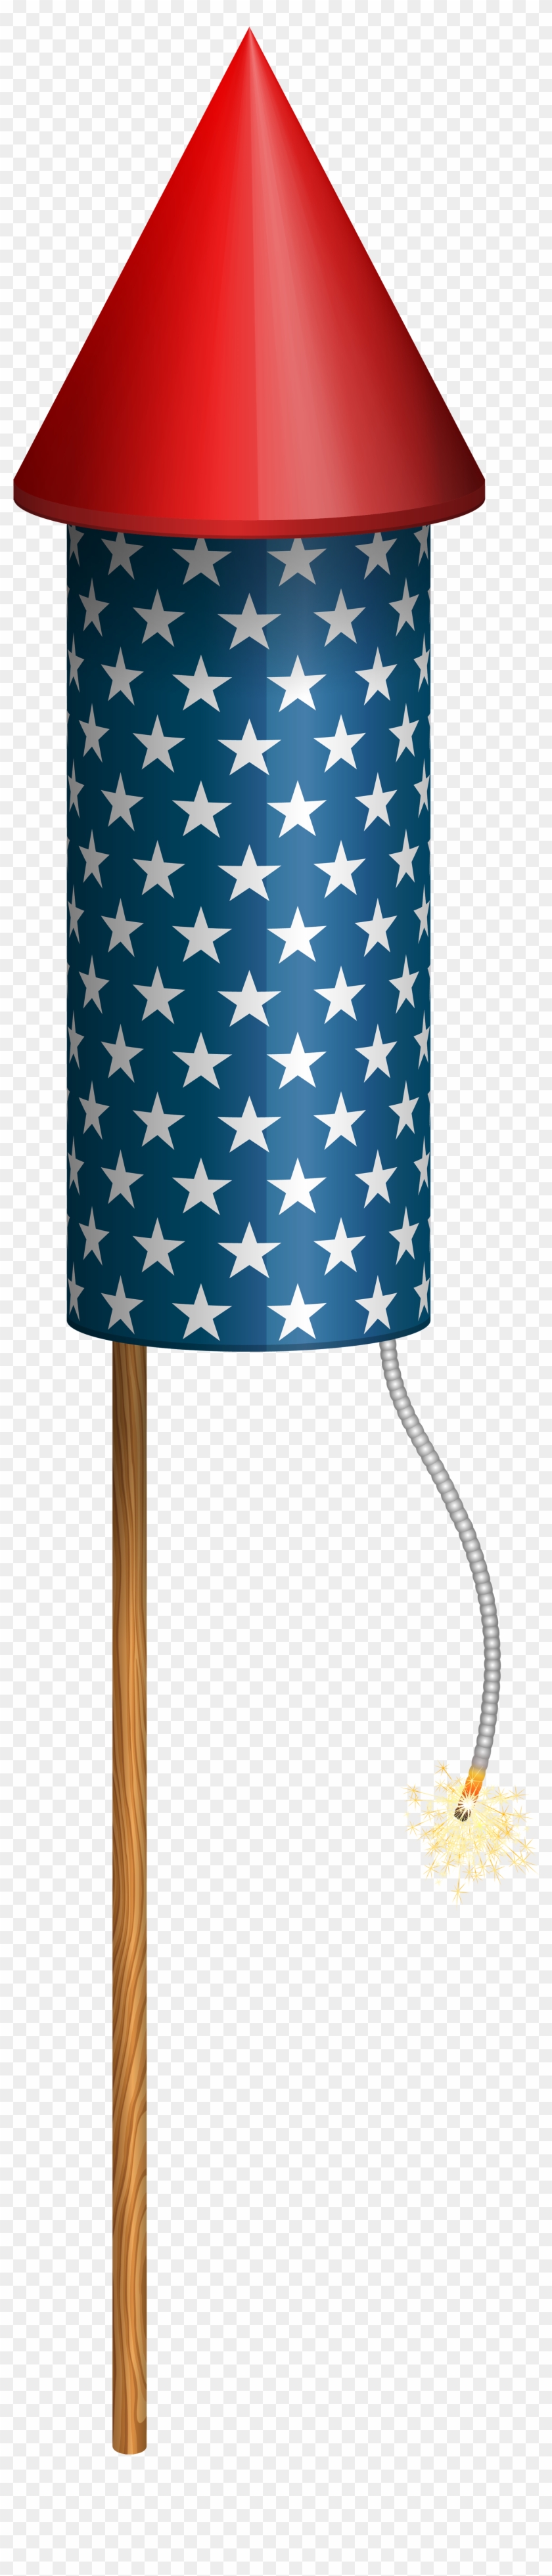 Lampshade Clipart #225447